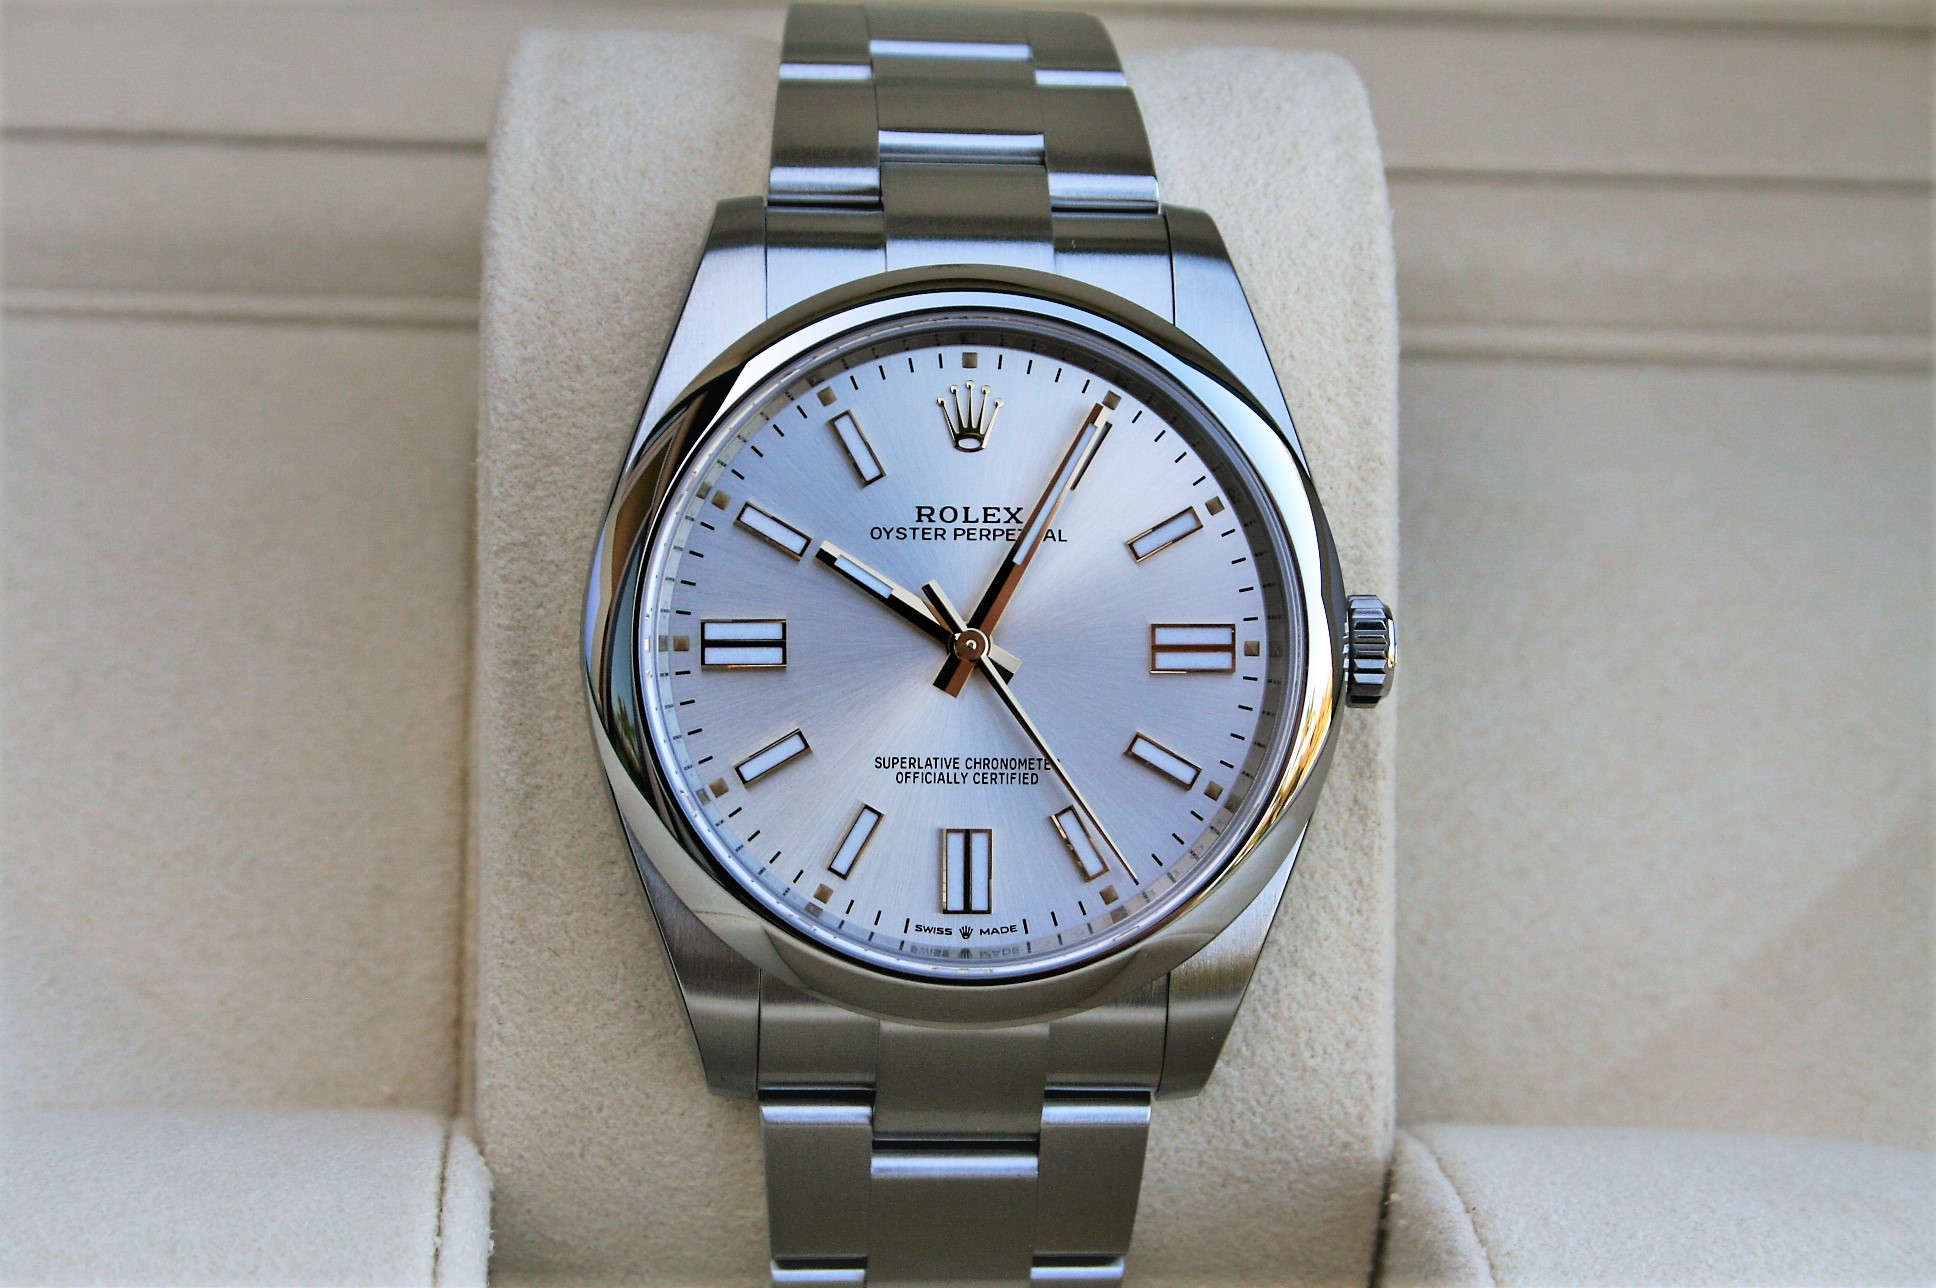 41mm oyster perpetual